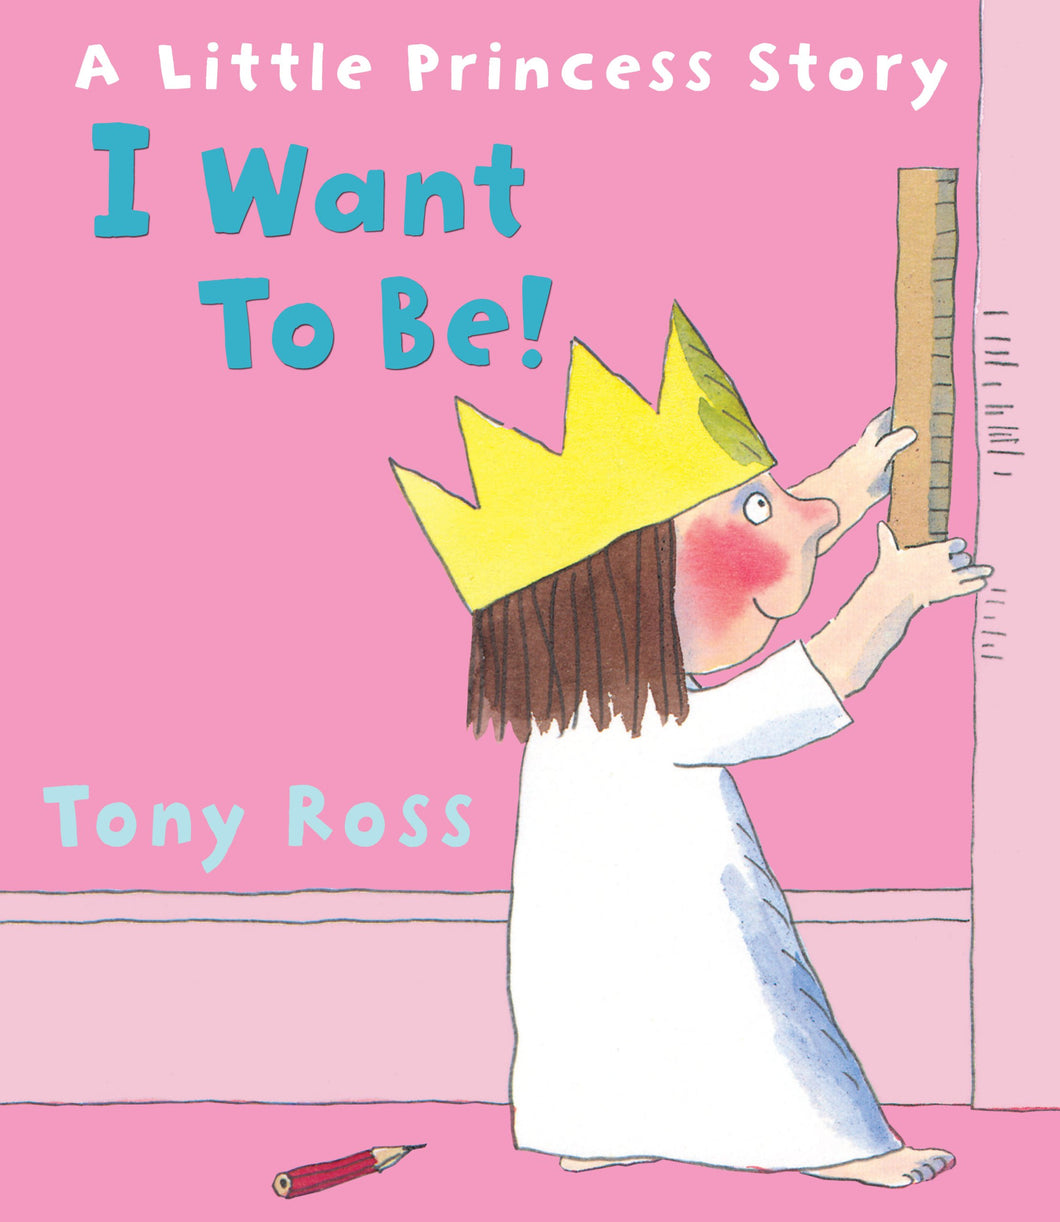 Little Princess: I Want to Be!